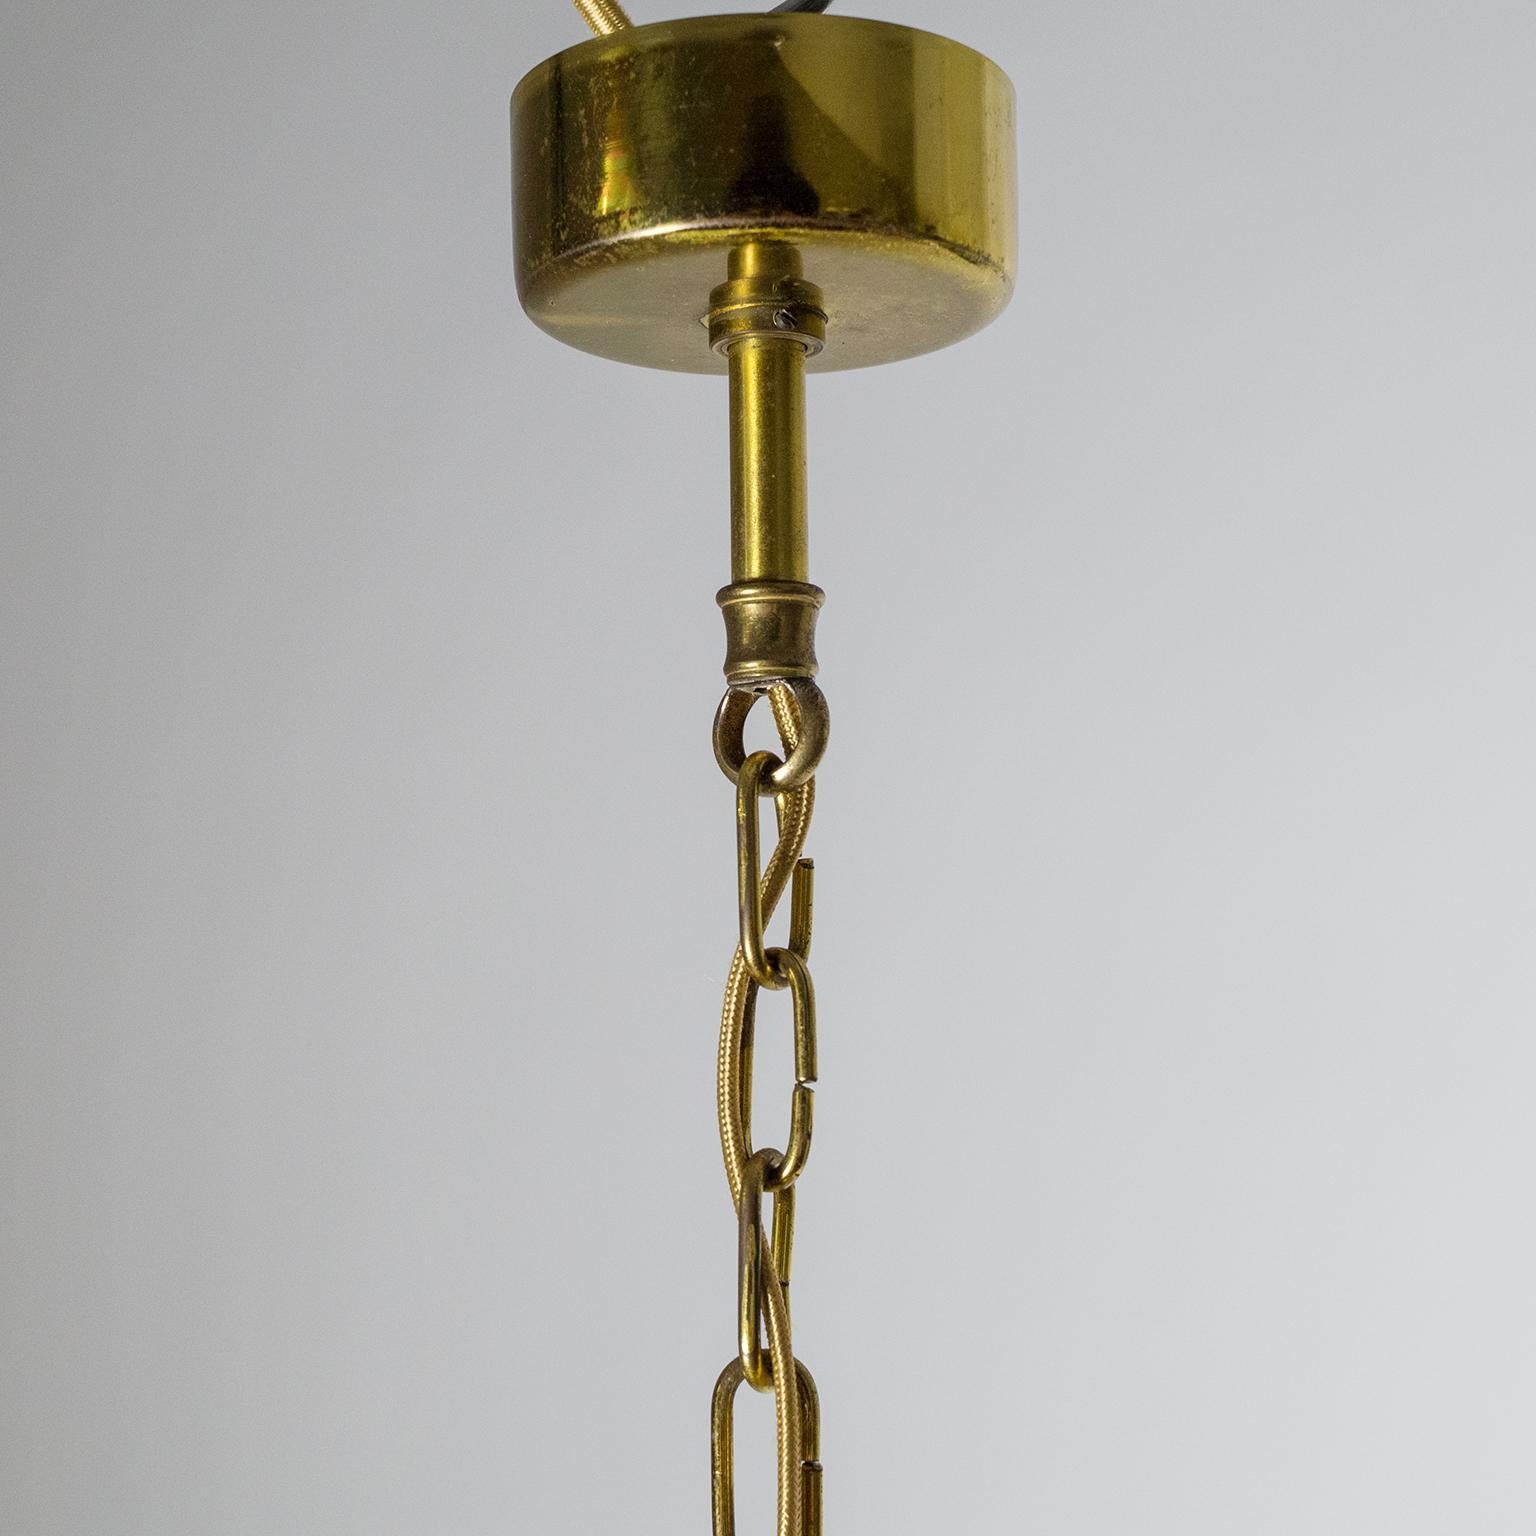 Plastic French Modernist Pendant, 1960s, Brass and Satin Glass